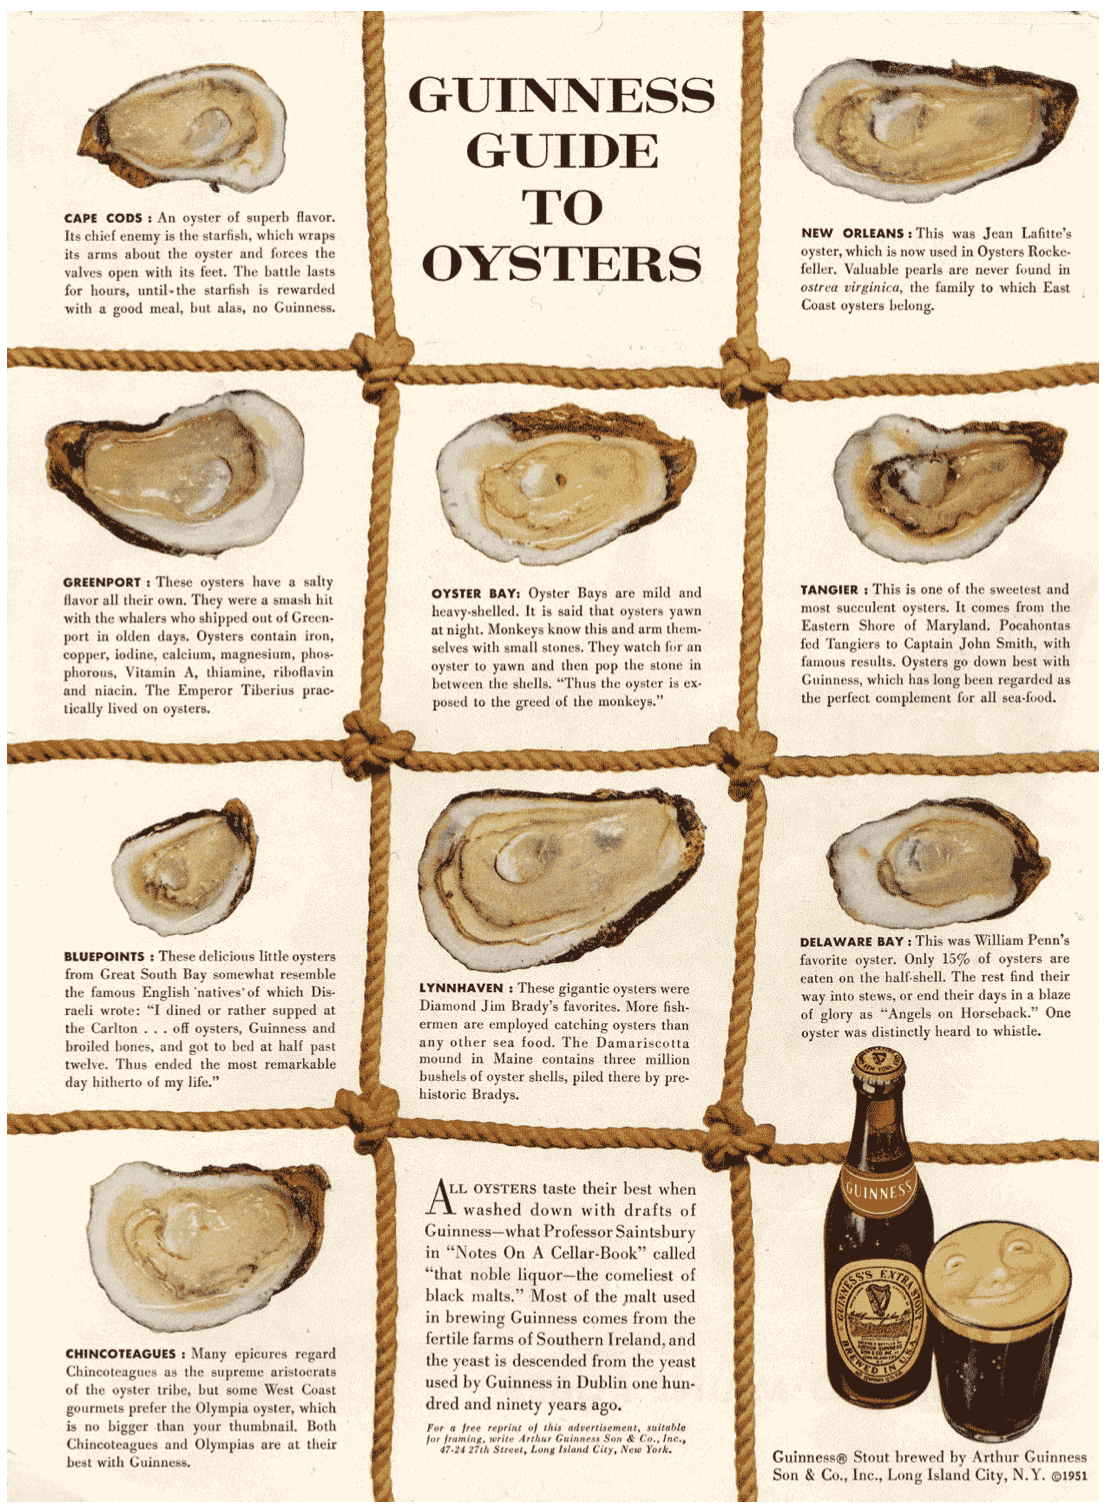 Guinness strategy in a guide to oysters